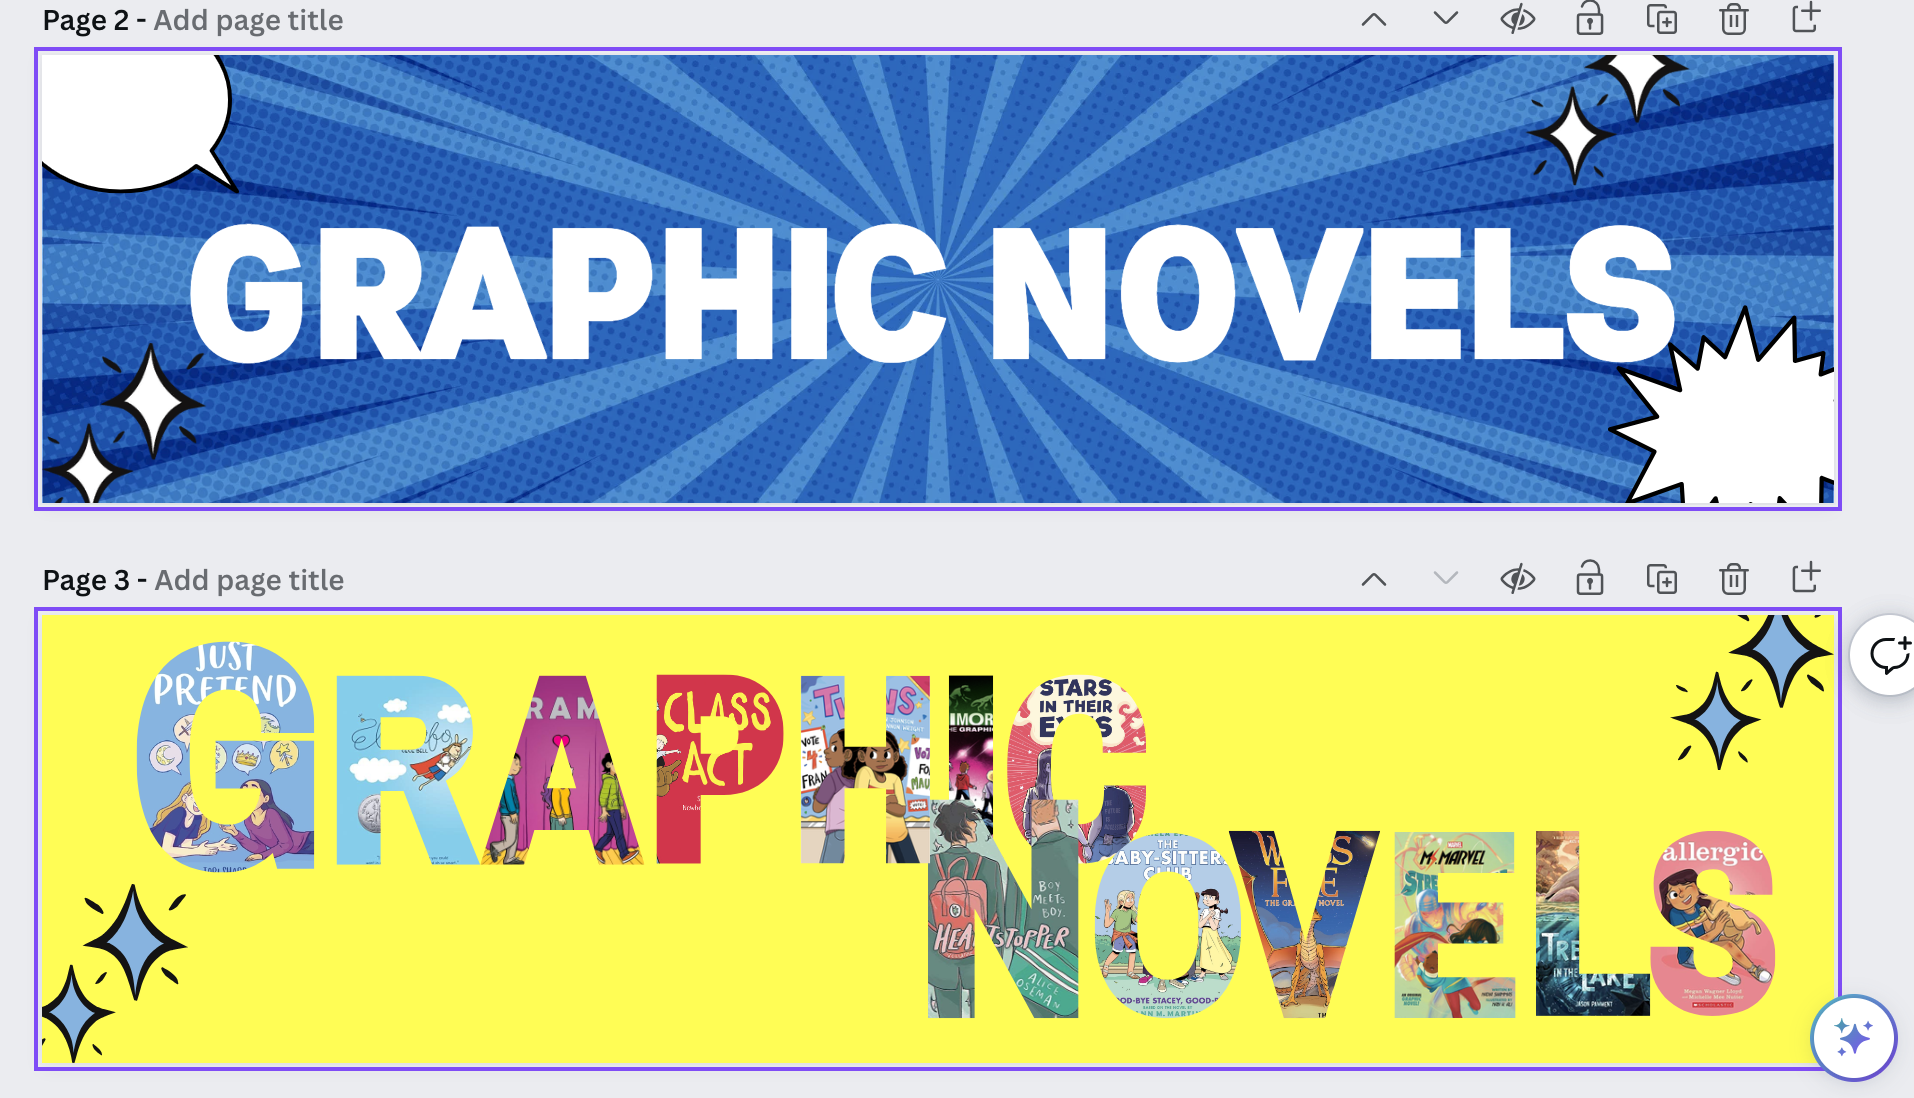 Two graphic novel banners in blue and yellow